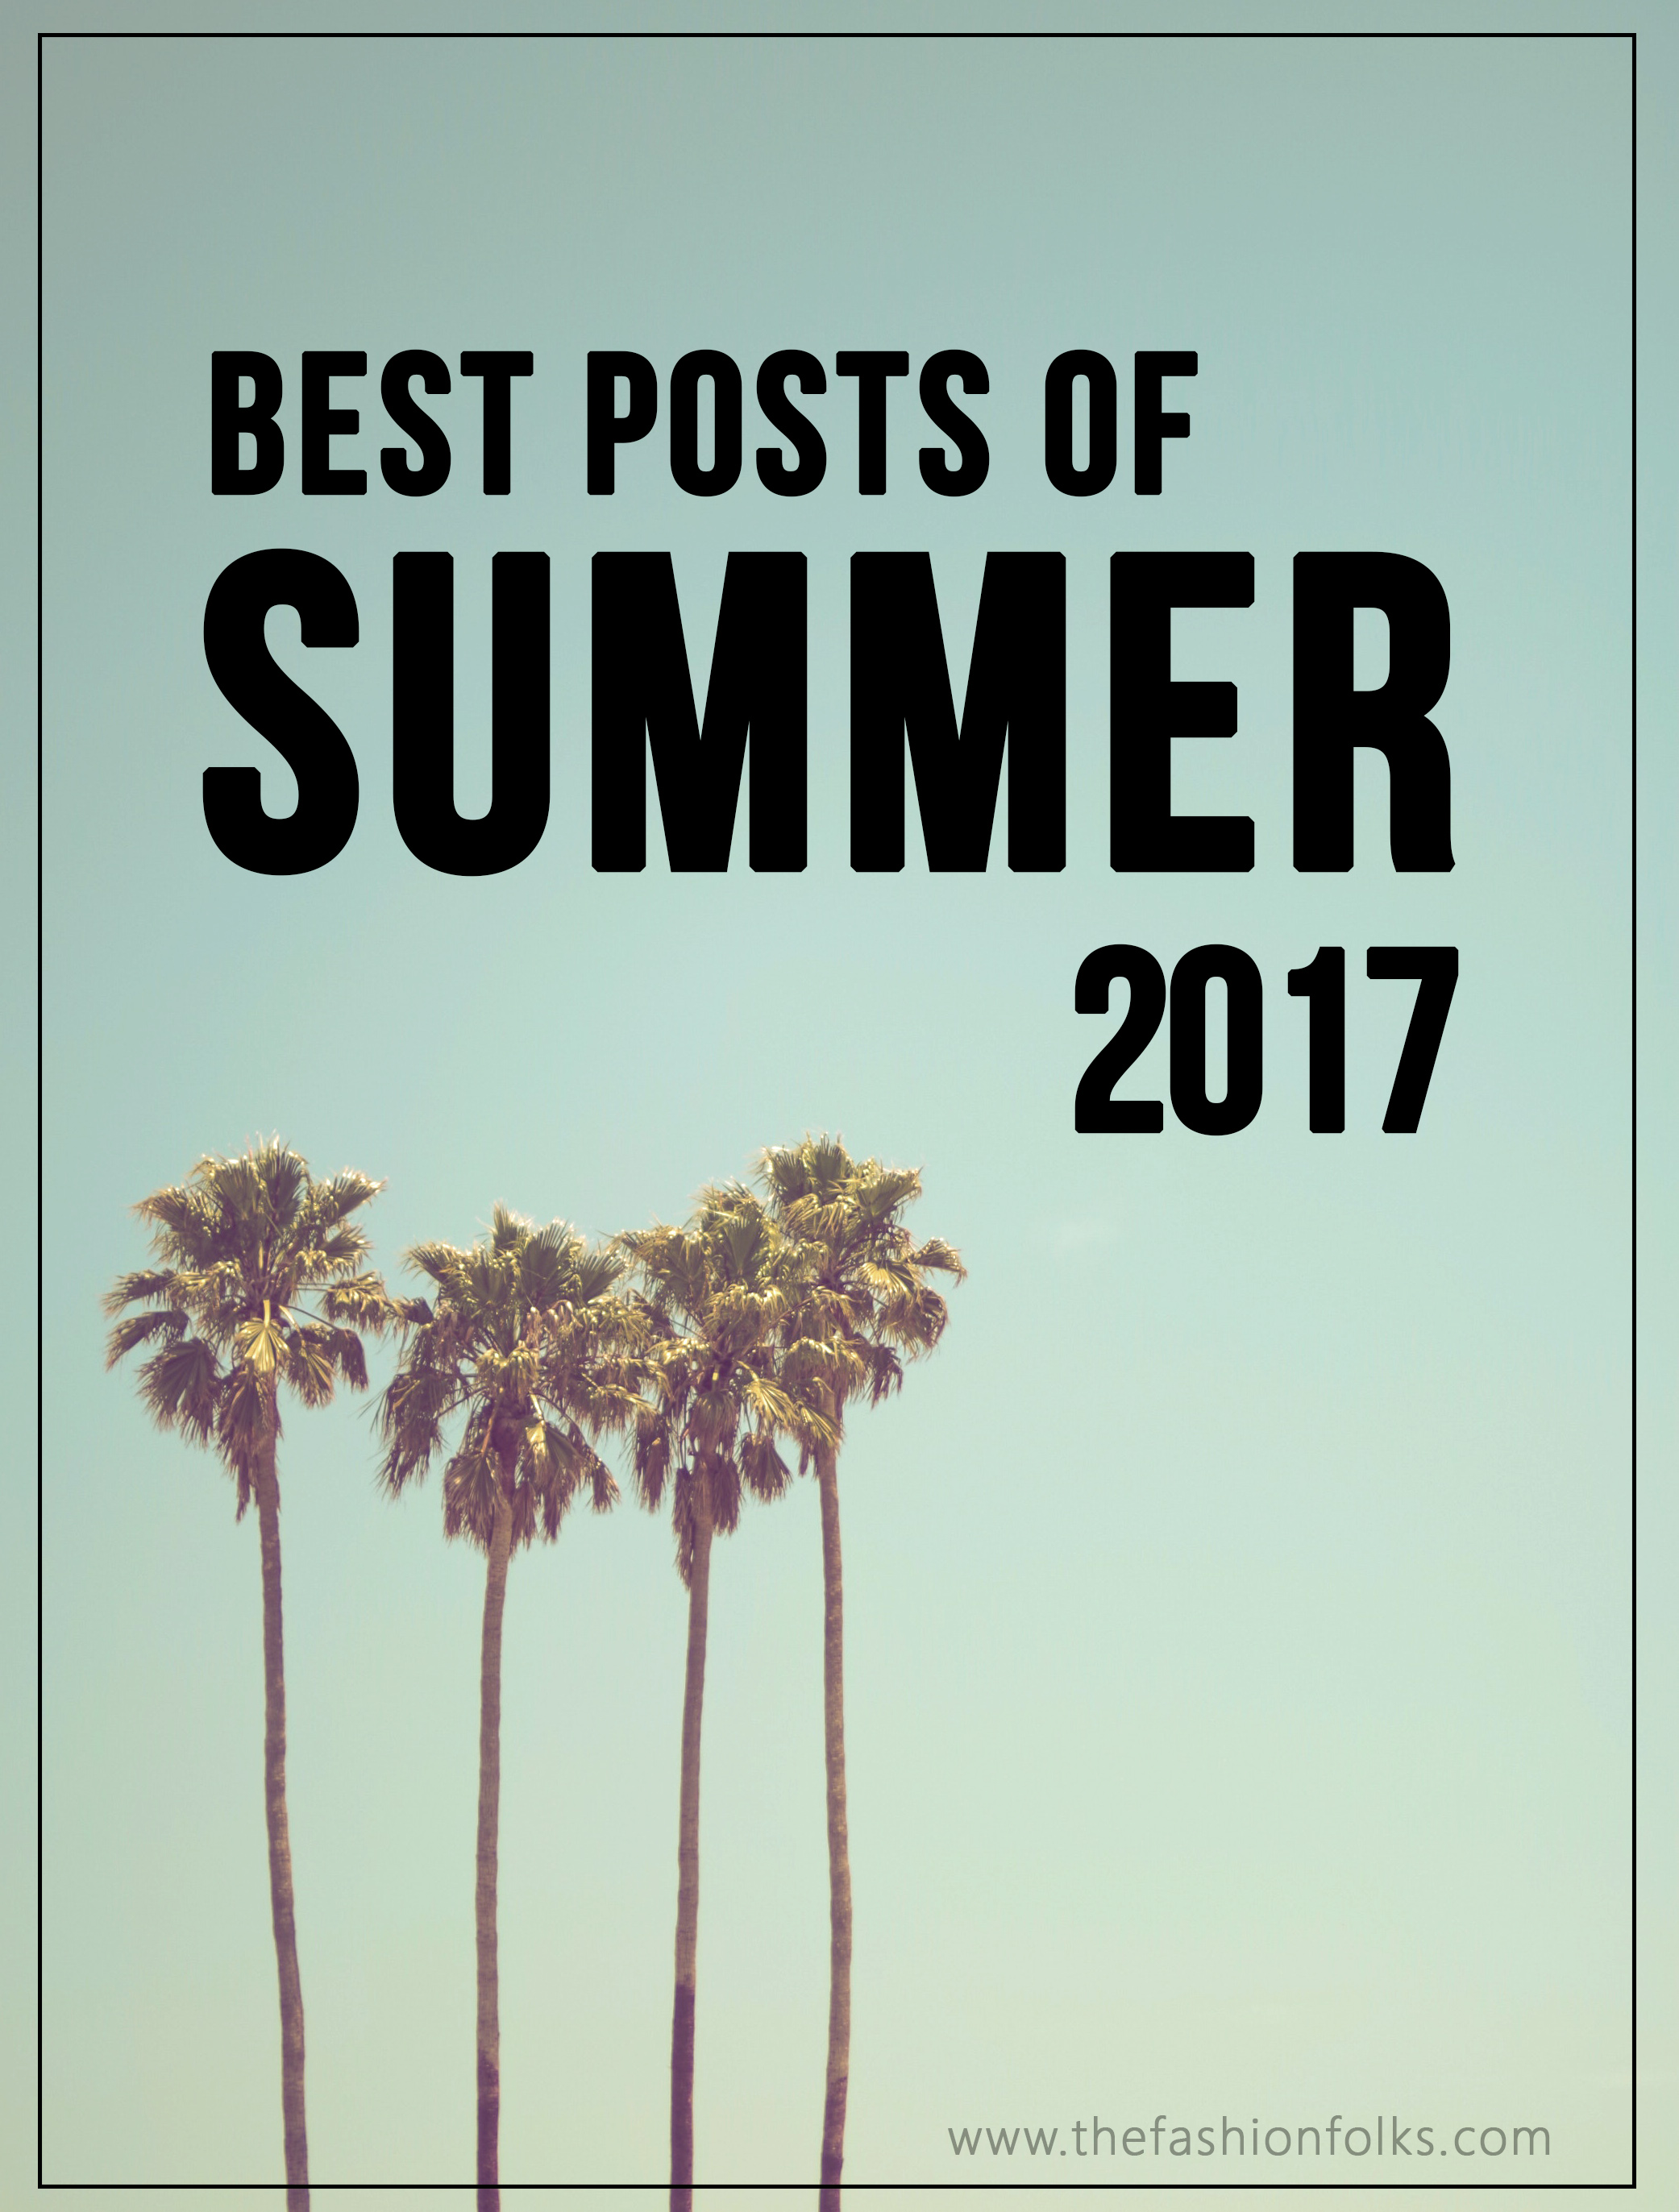 Best Posts Of Summer 2017 | The Fashion Folks